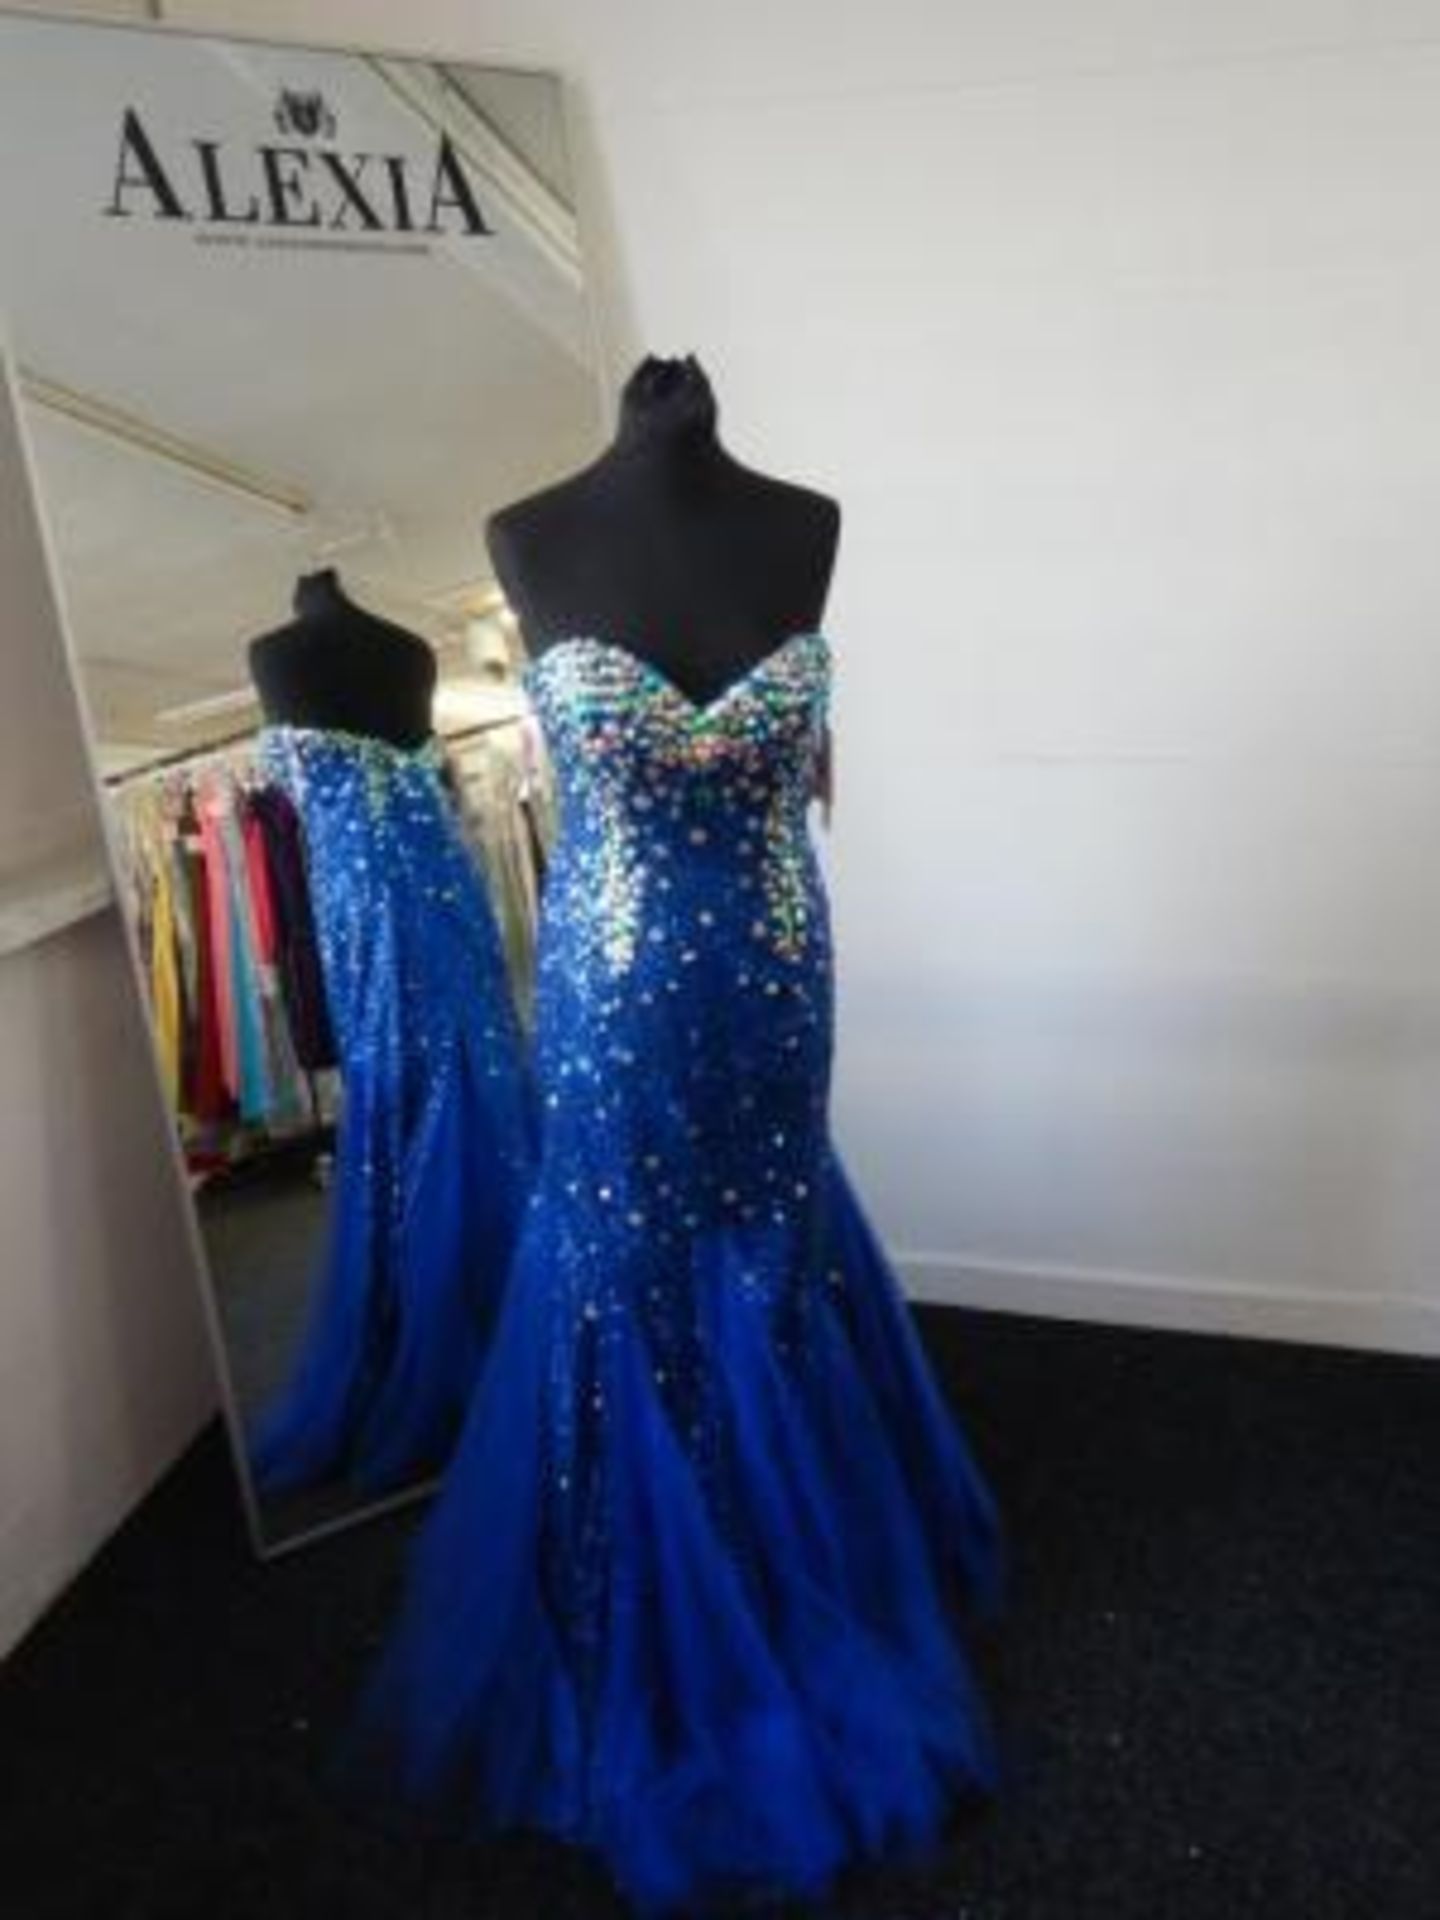 New Prom Dress By Alexia Designs - Image 2 of 2